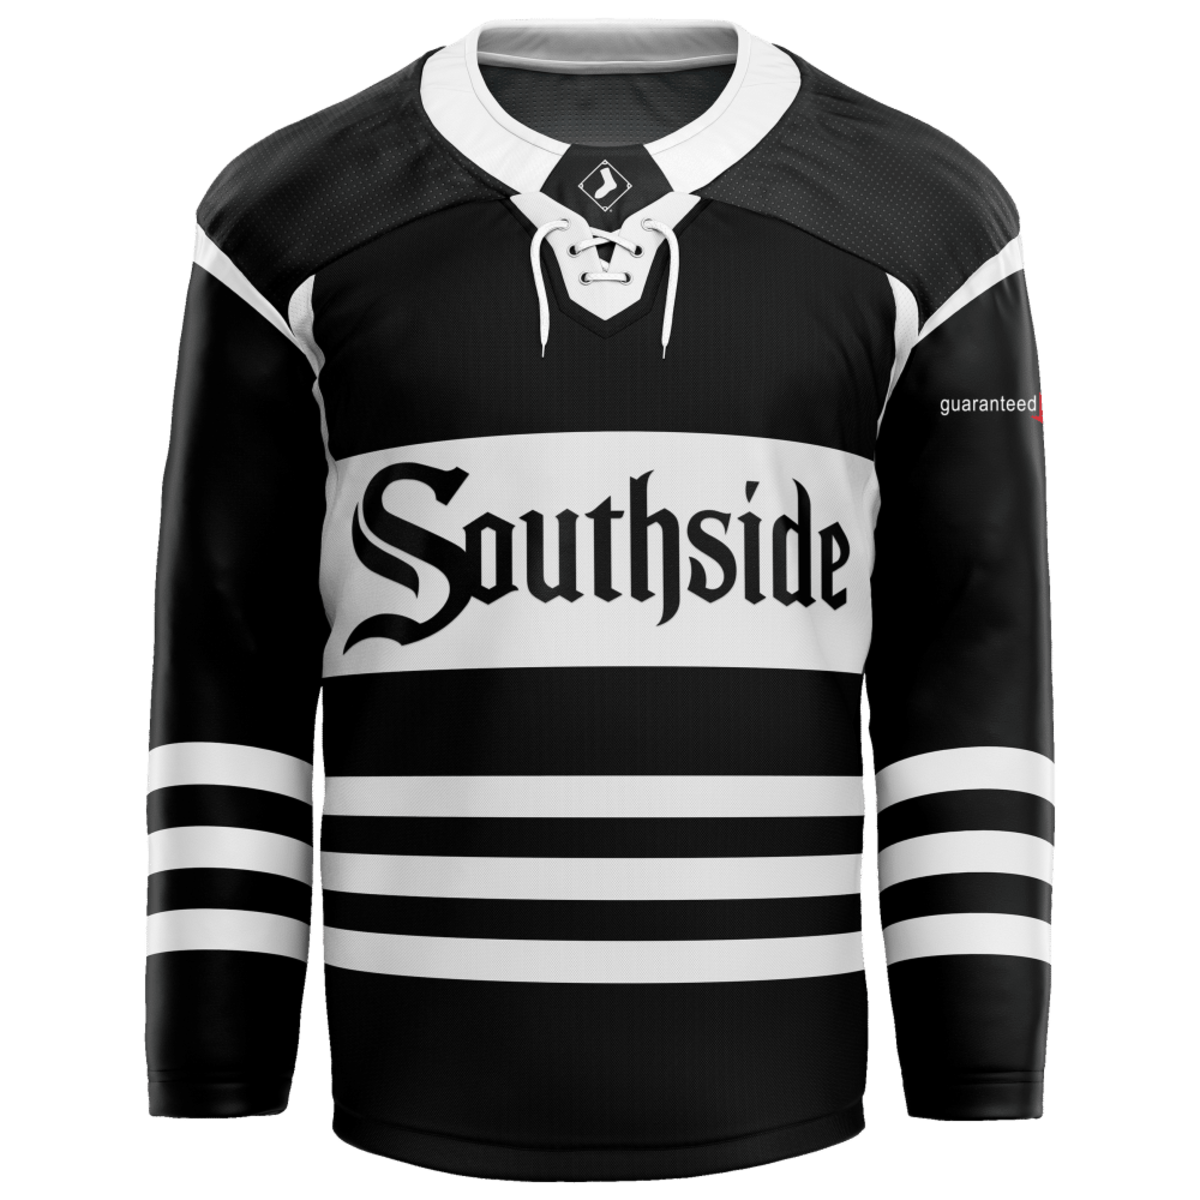 White Sox Hockey Jersey Giveaway Date